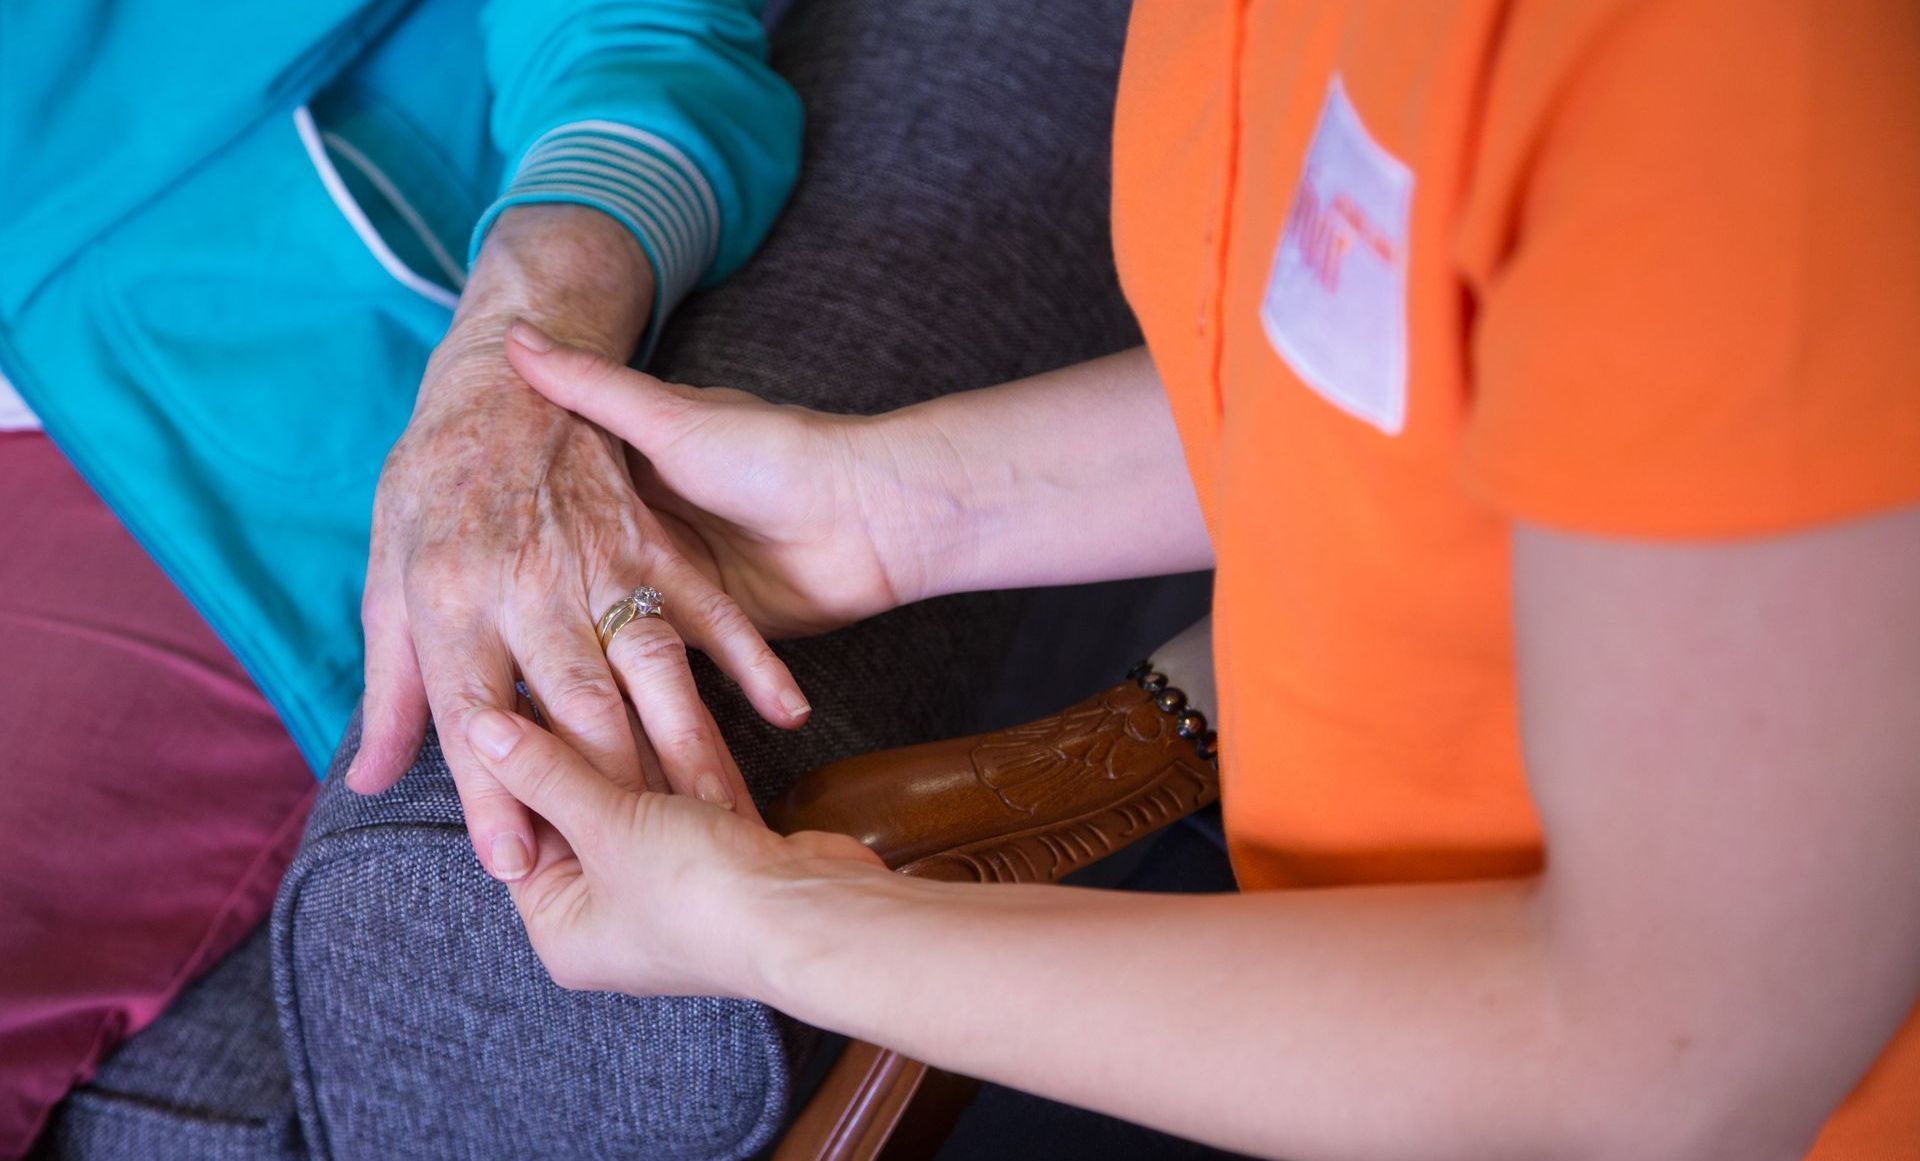 A woman in an orange shirt is holding the hand of an older woman.